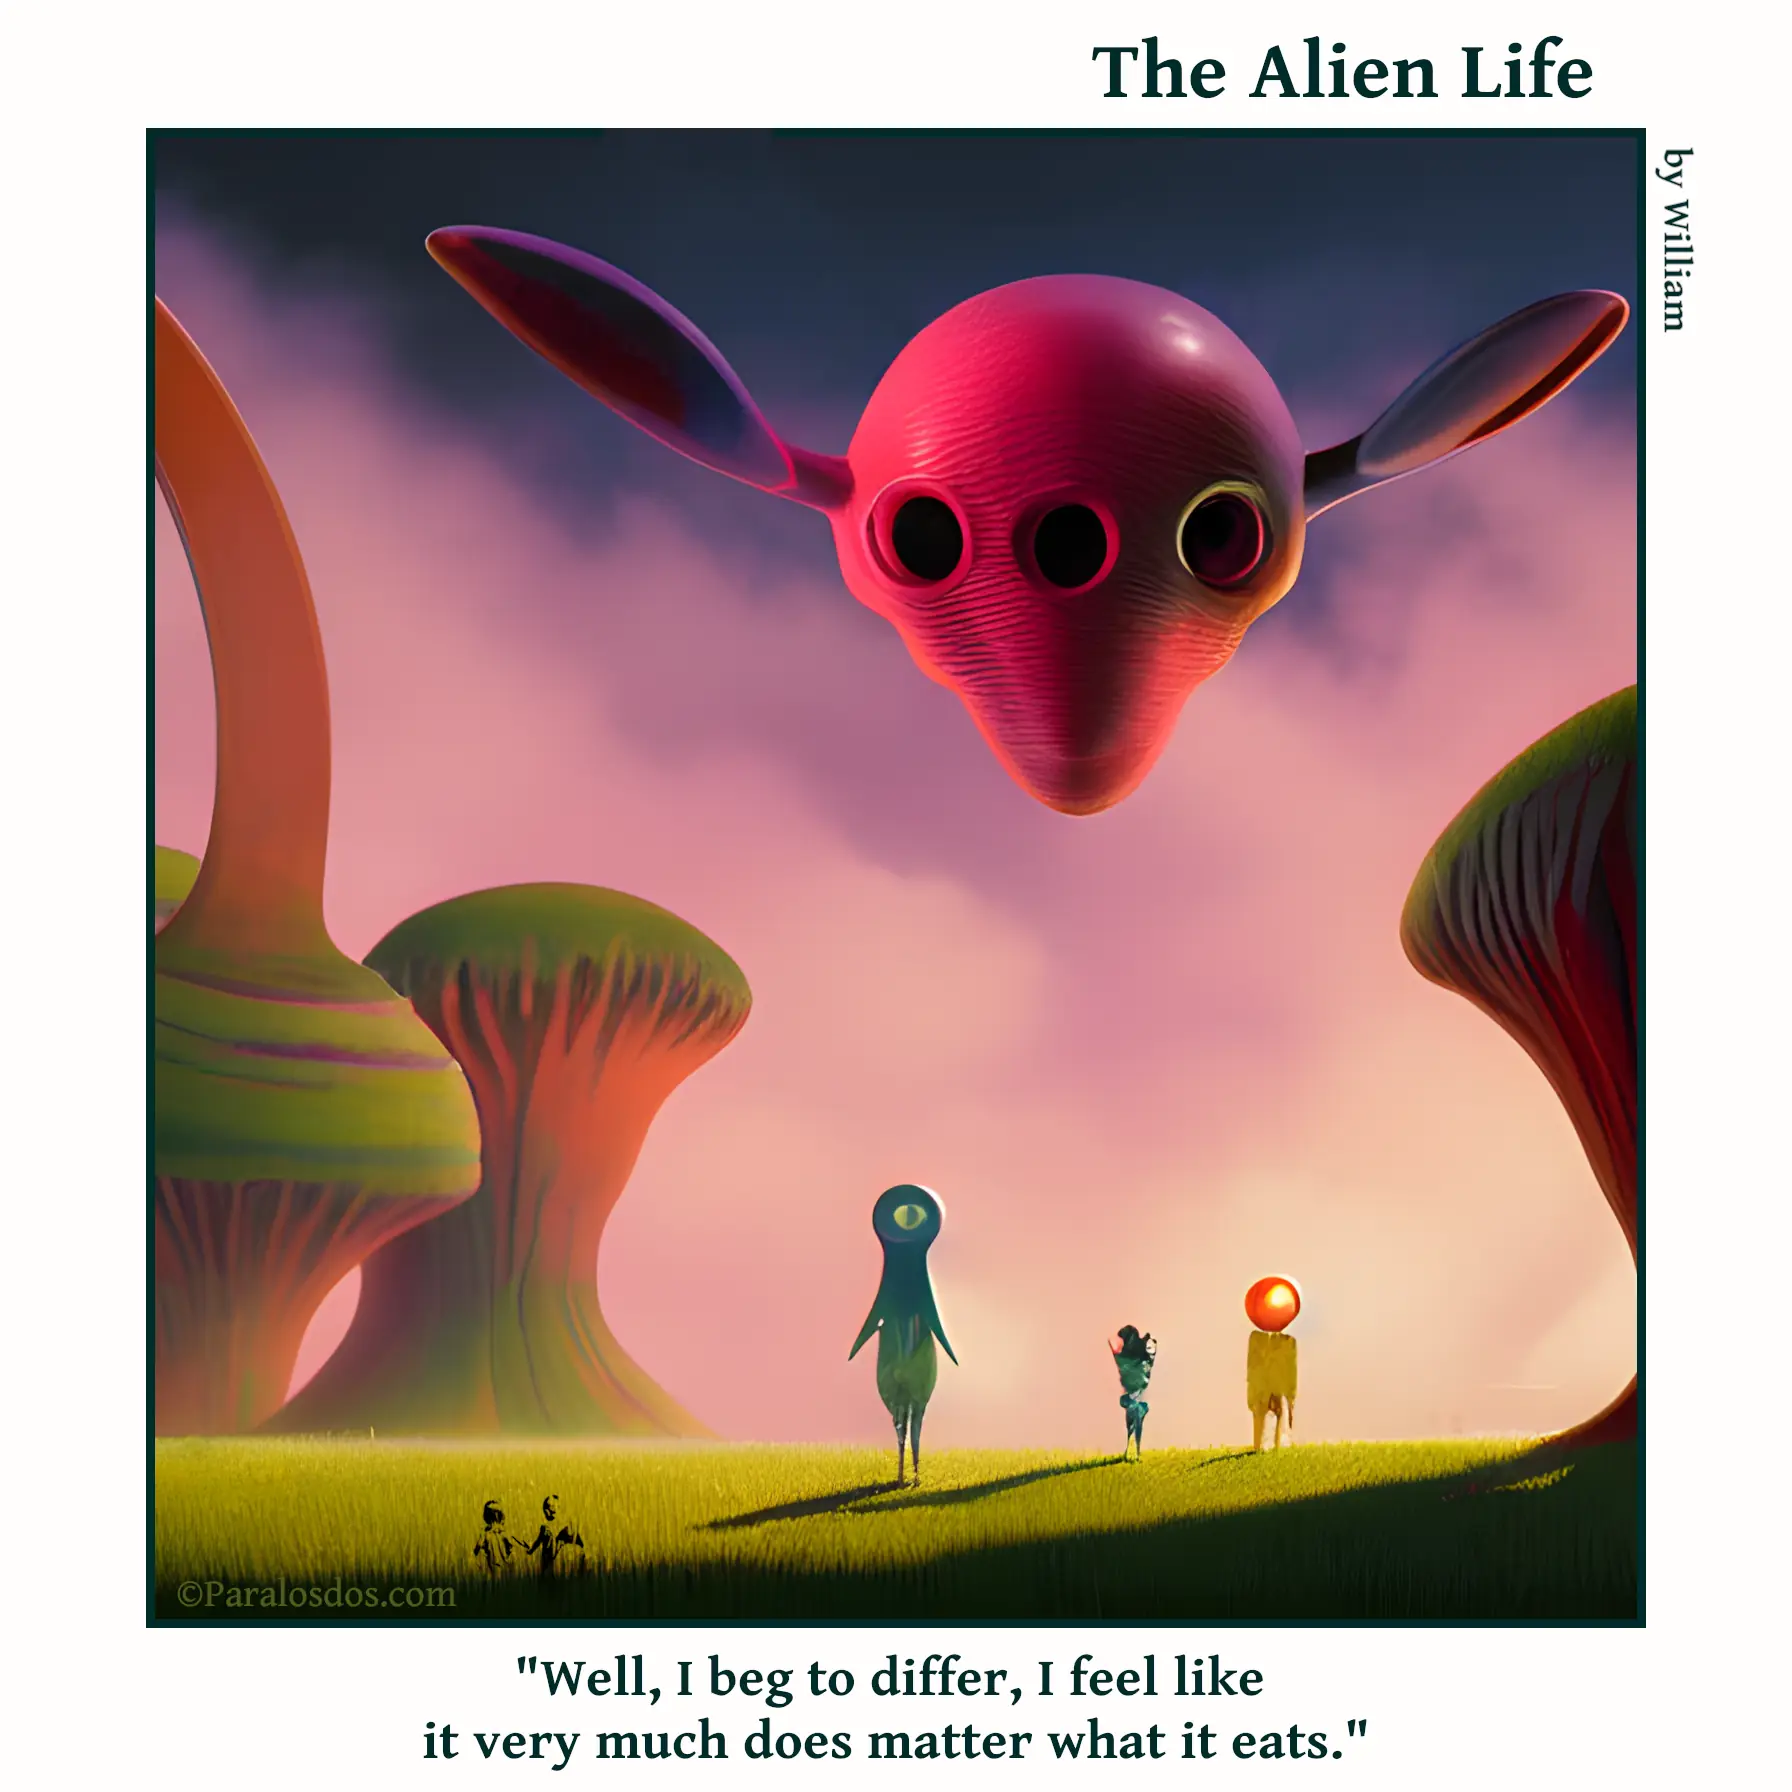 The Alien Life, one panel Comic. Three figures are on the ground. Hovering above them is a large red creature with three eyes.. The caption reads: "Well, I beg to differ, I feel like it very much does matter what it eats."